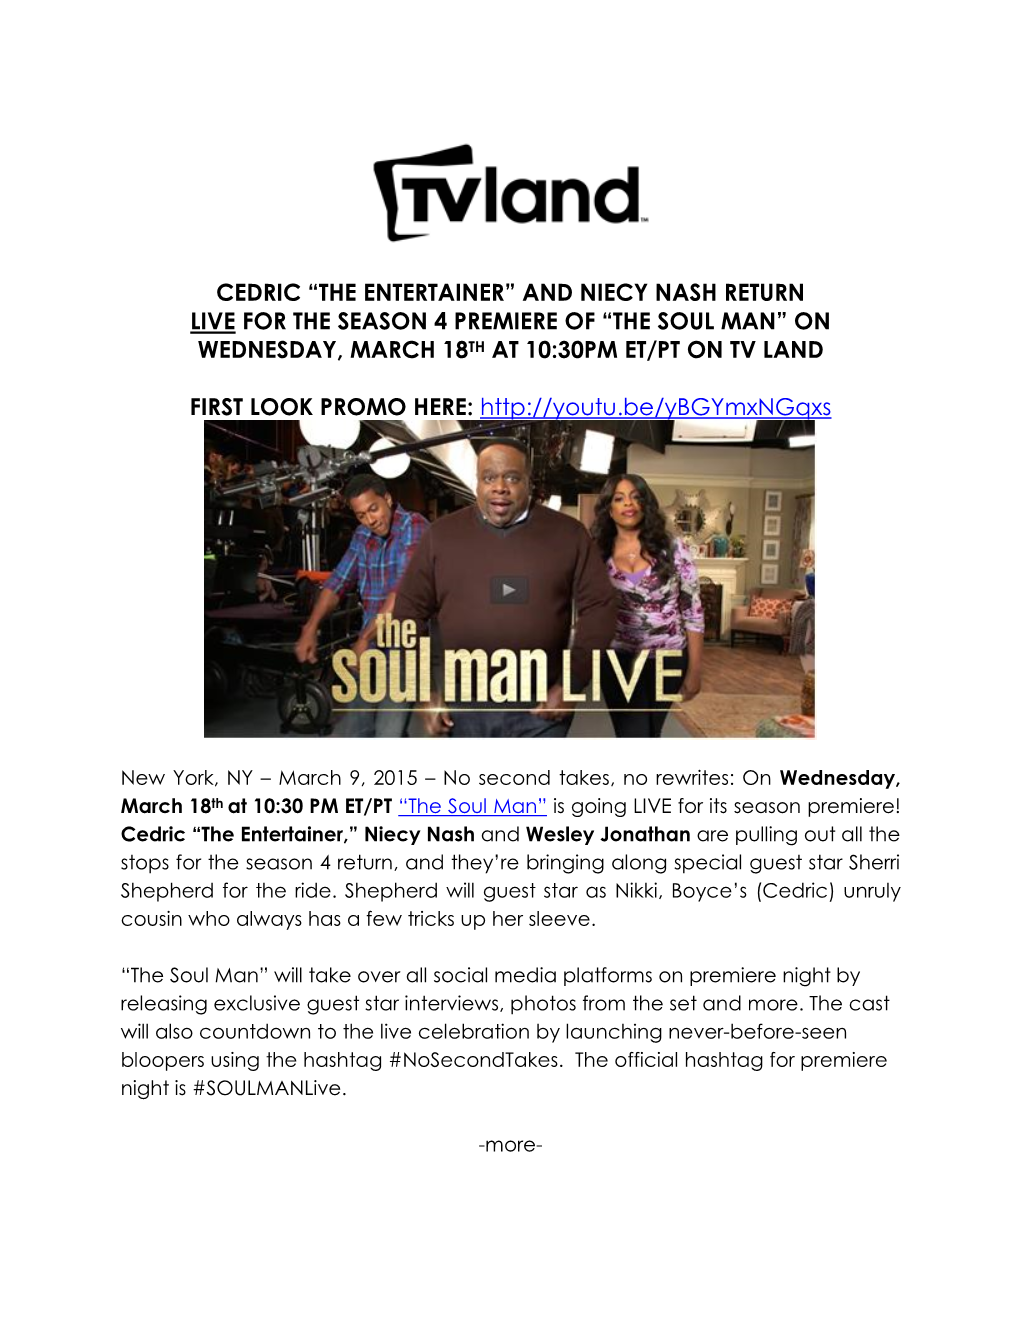 Cedric “The Entertainer” and Niecy Nash Return Live for the Season 4 Premiere of “The Soul Man” on Wednesday, March 18Th at 10:30Pm Et/Pt on Tv Land